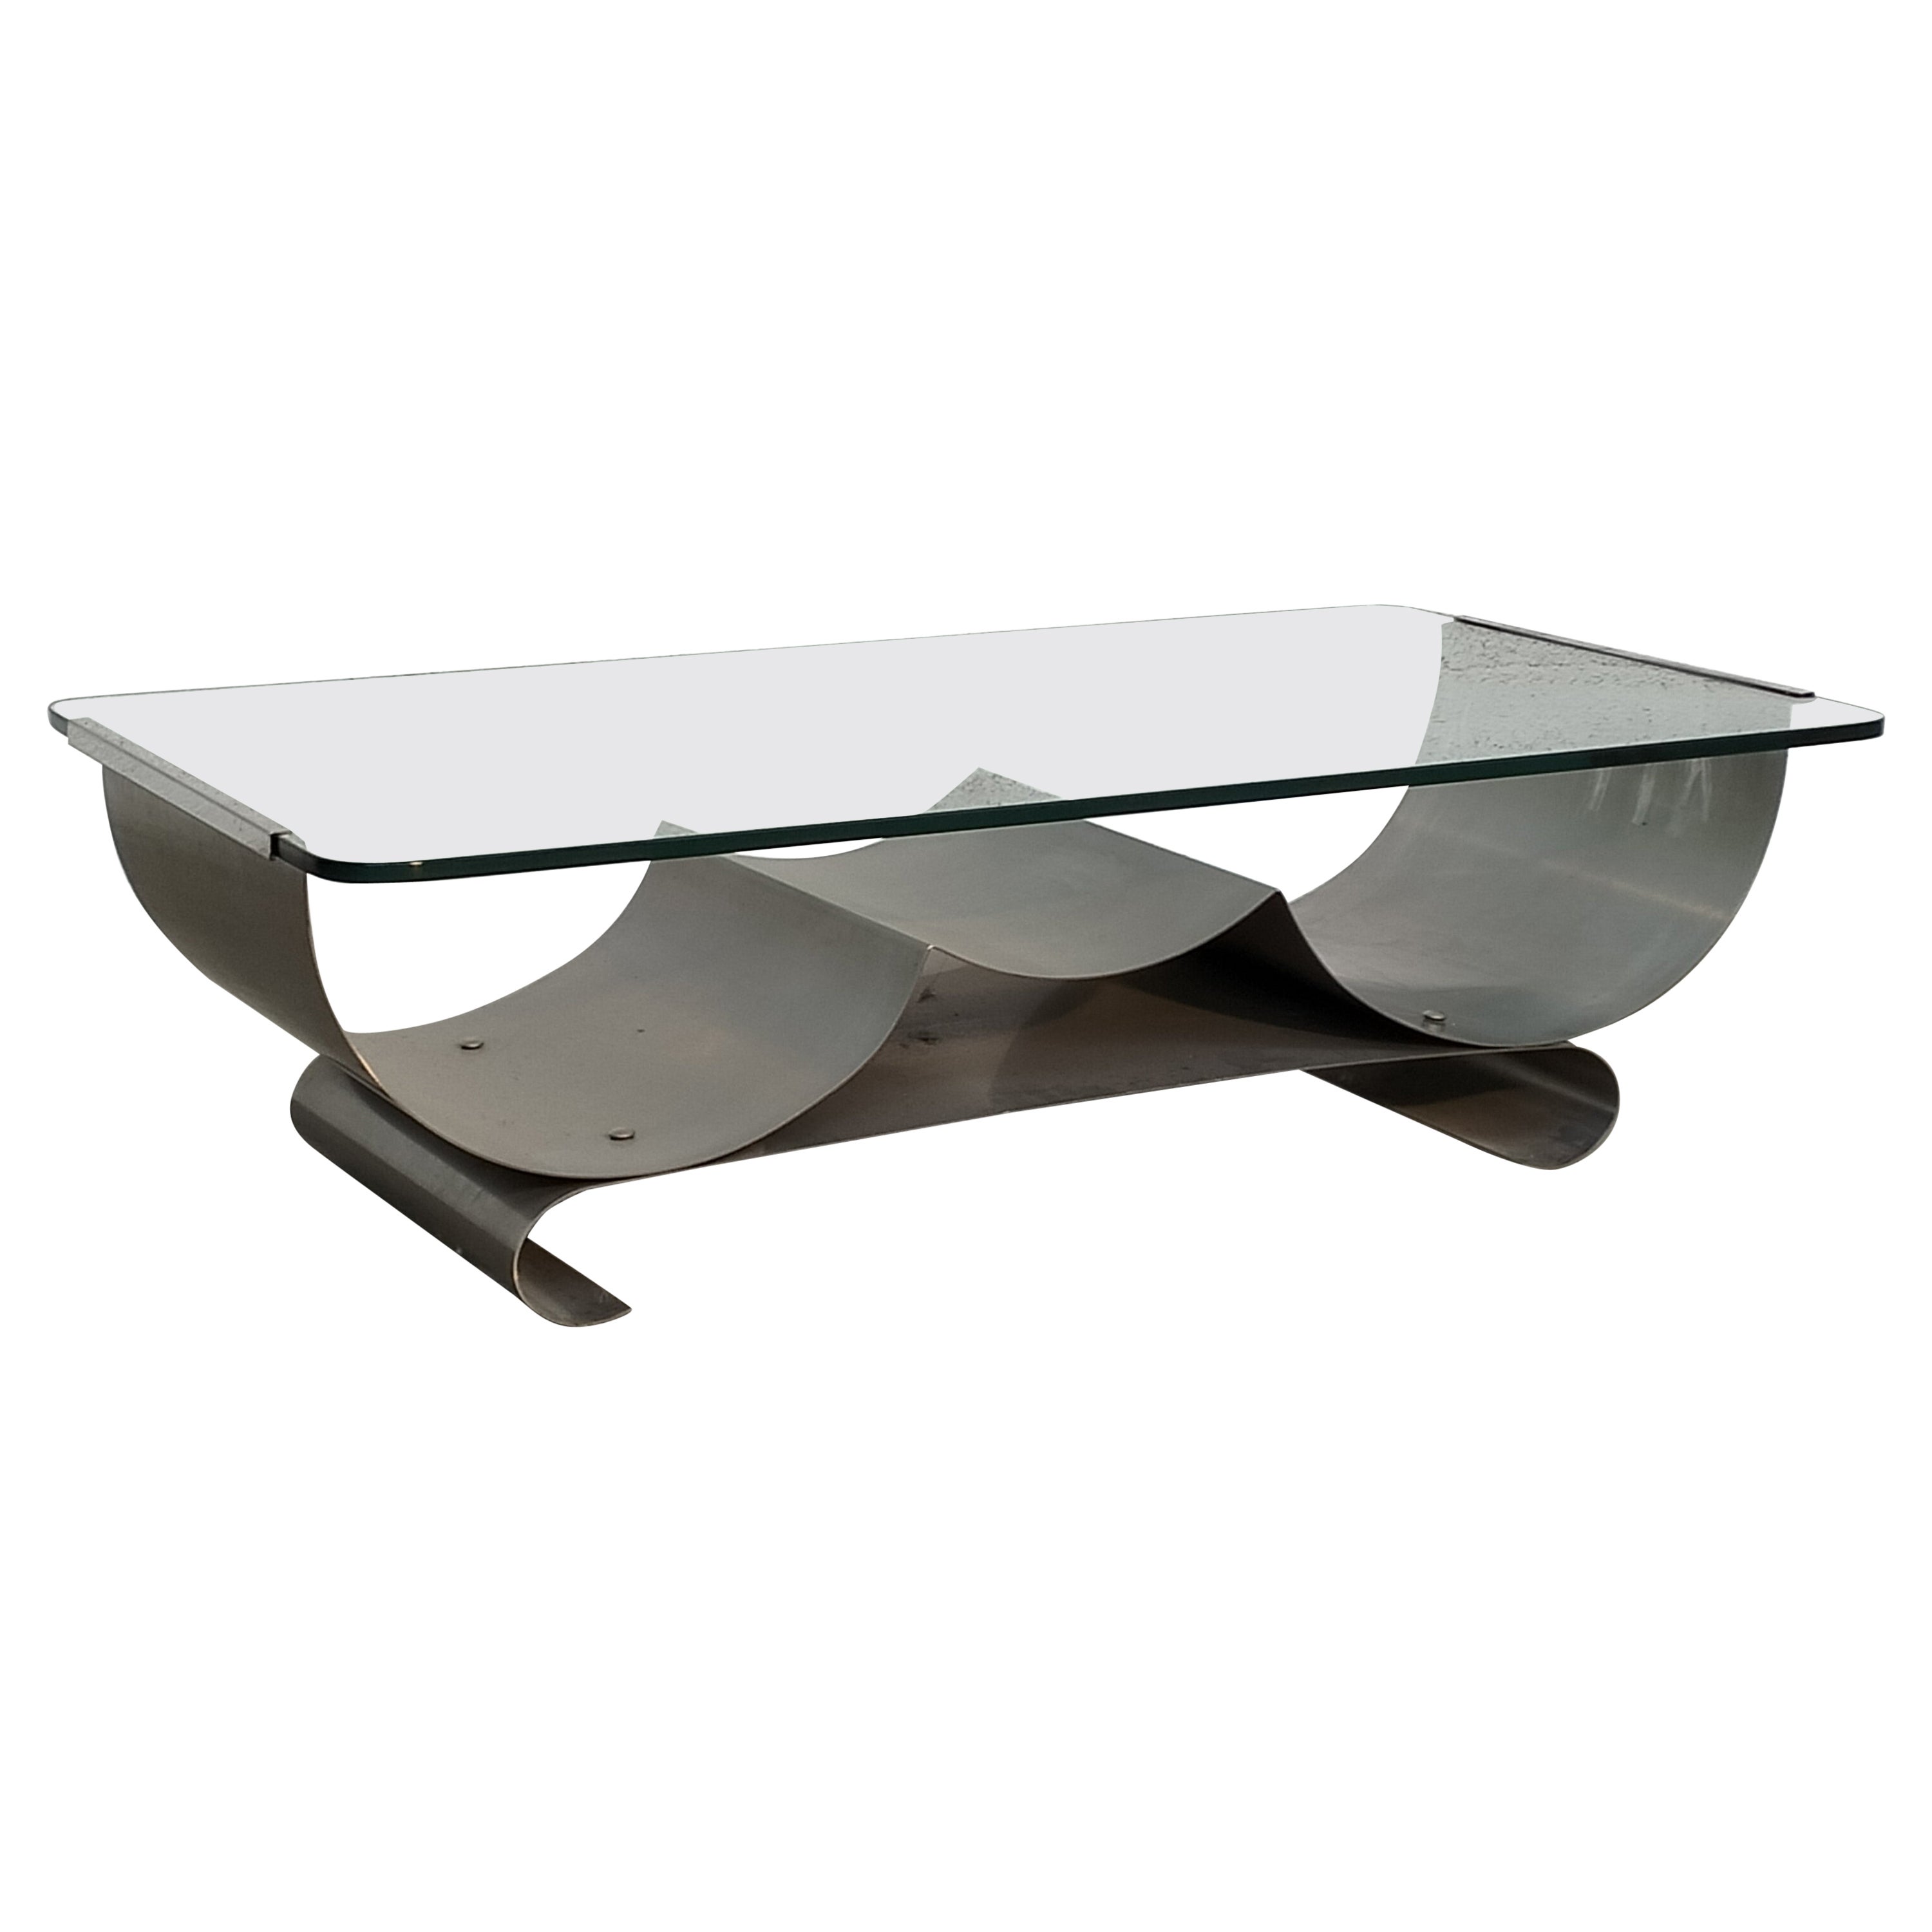 Stainless Steel and Glass Coffee Table by Francois Monnet for Kappa 70s